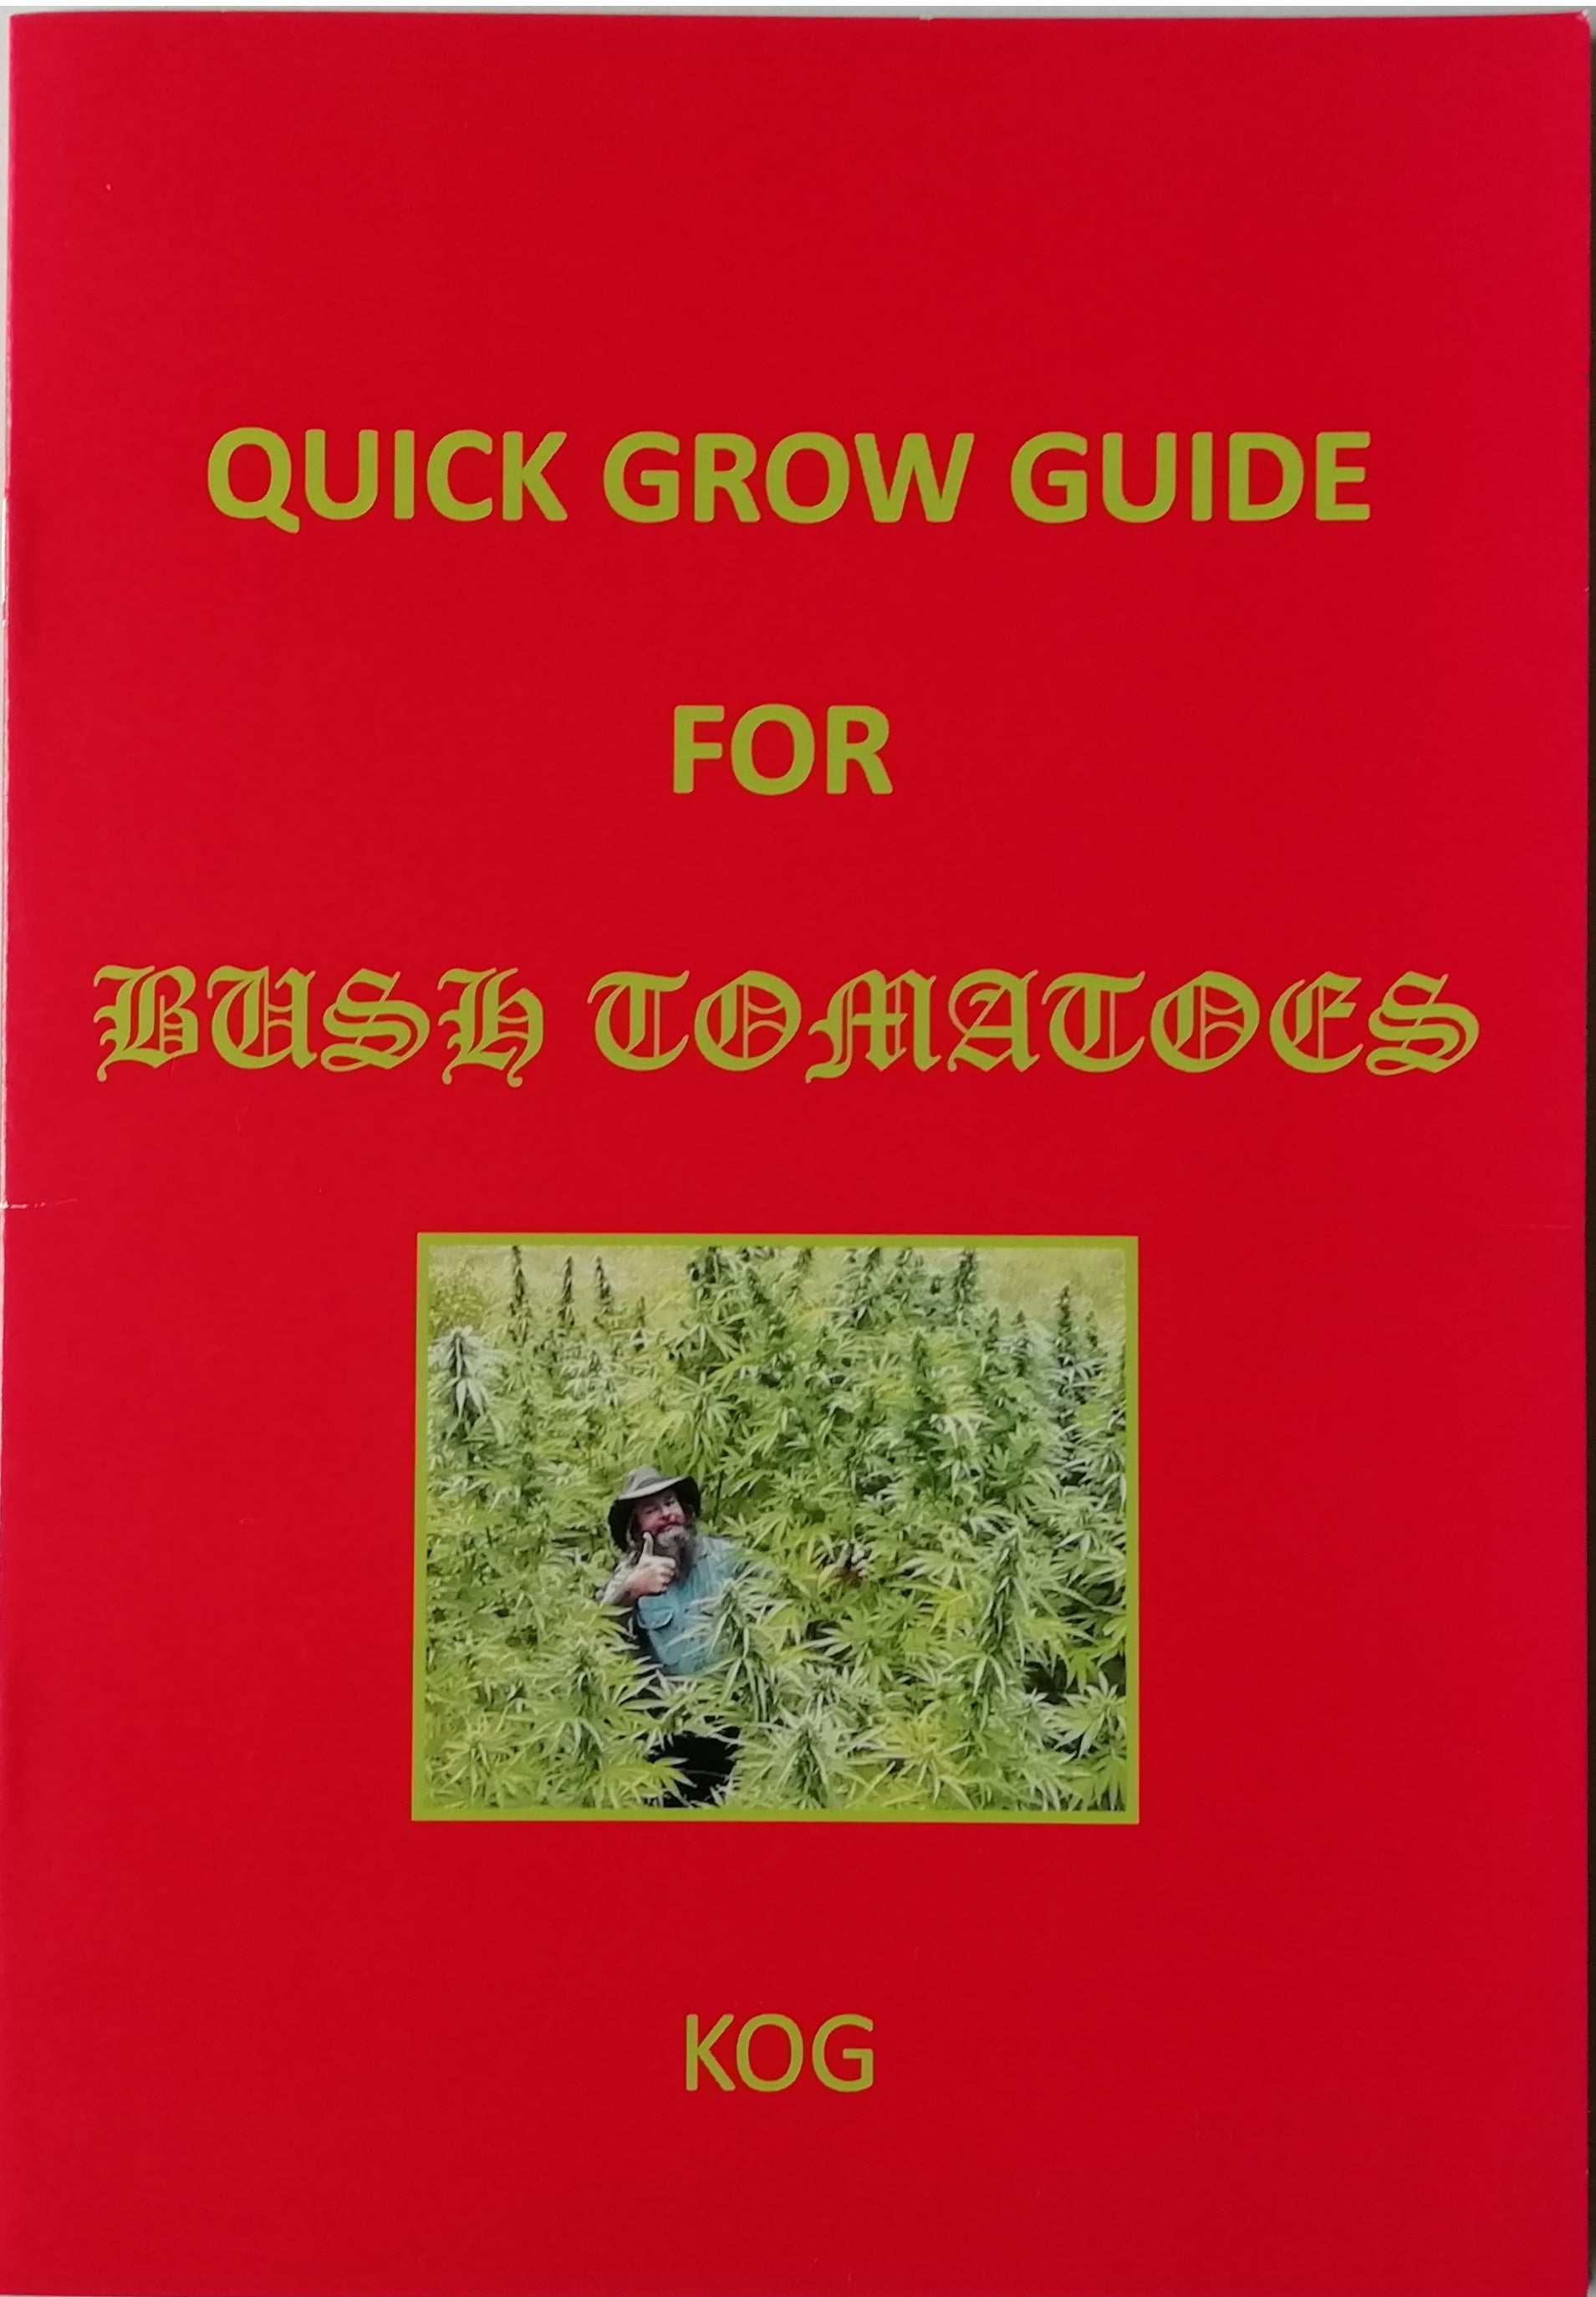 Quick Grow Guide for Bush Tomatoes by Kog